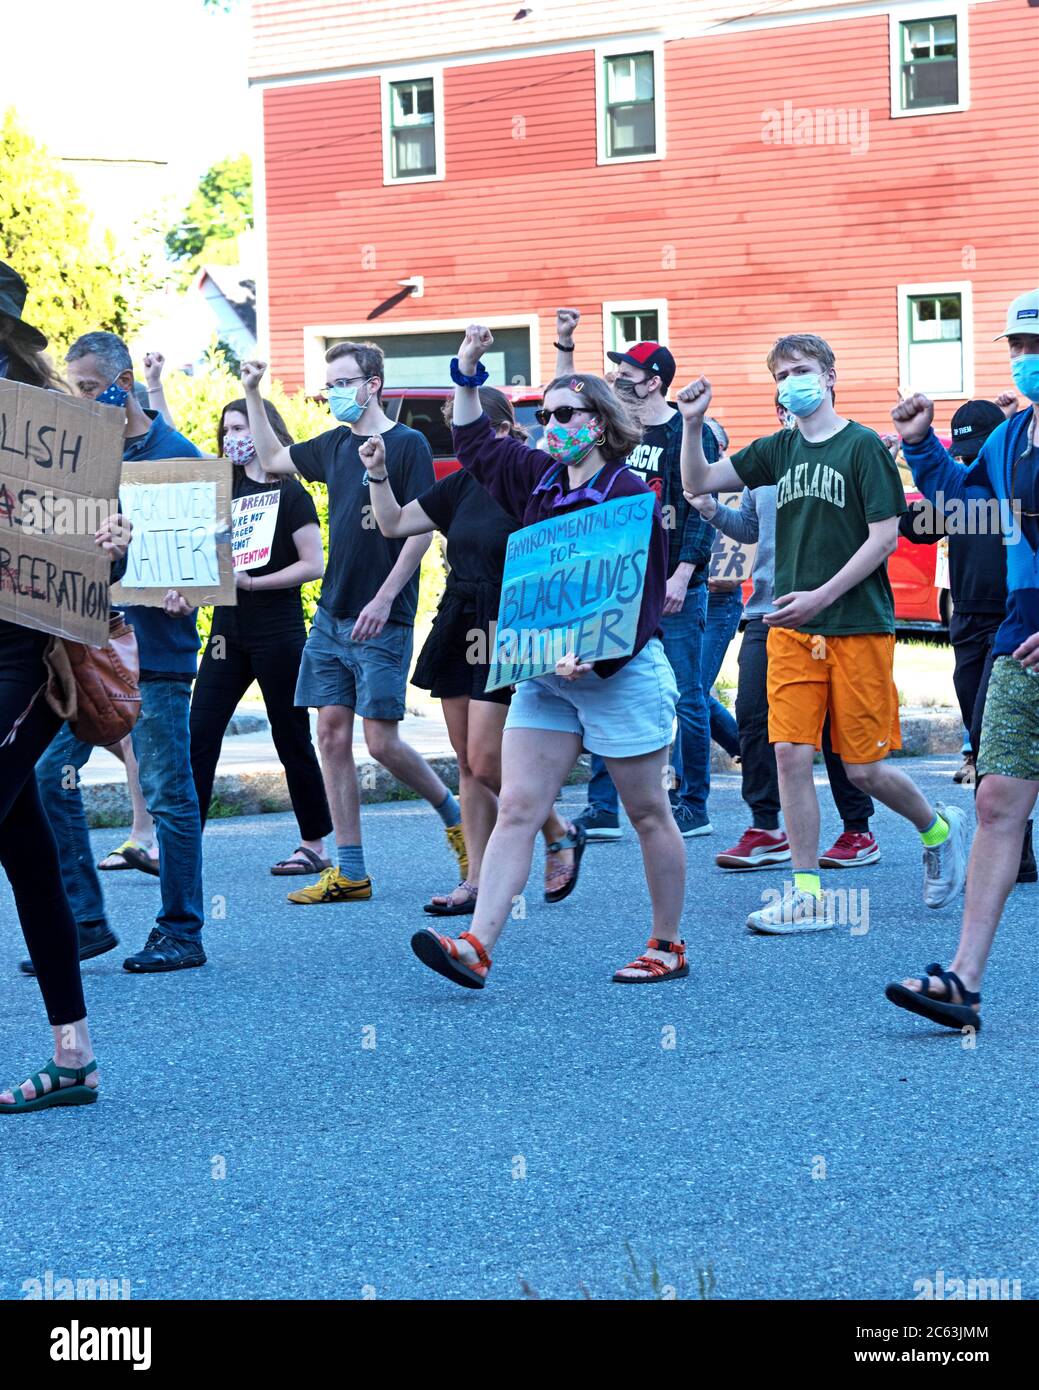 Bar Harbor, Maine, USA. 06 July, 2020. Marchers in a protest led by the Mount Desert Island Racial Justice Collective walk silently down Ledgelawn Avenue with a fist raised in support of Black Lives Matter. ©Jennifer Booher/Alamy Live News Stock Photo